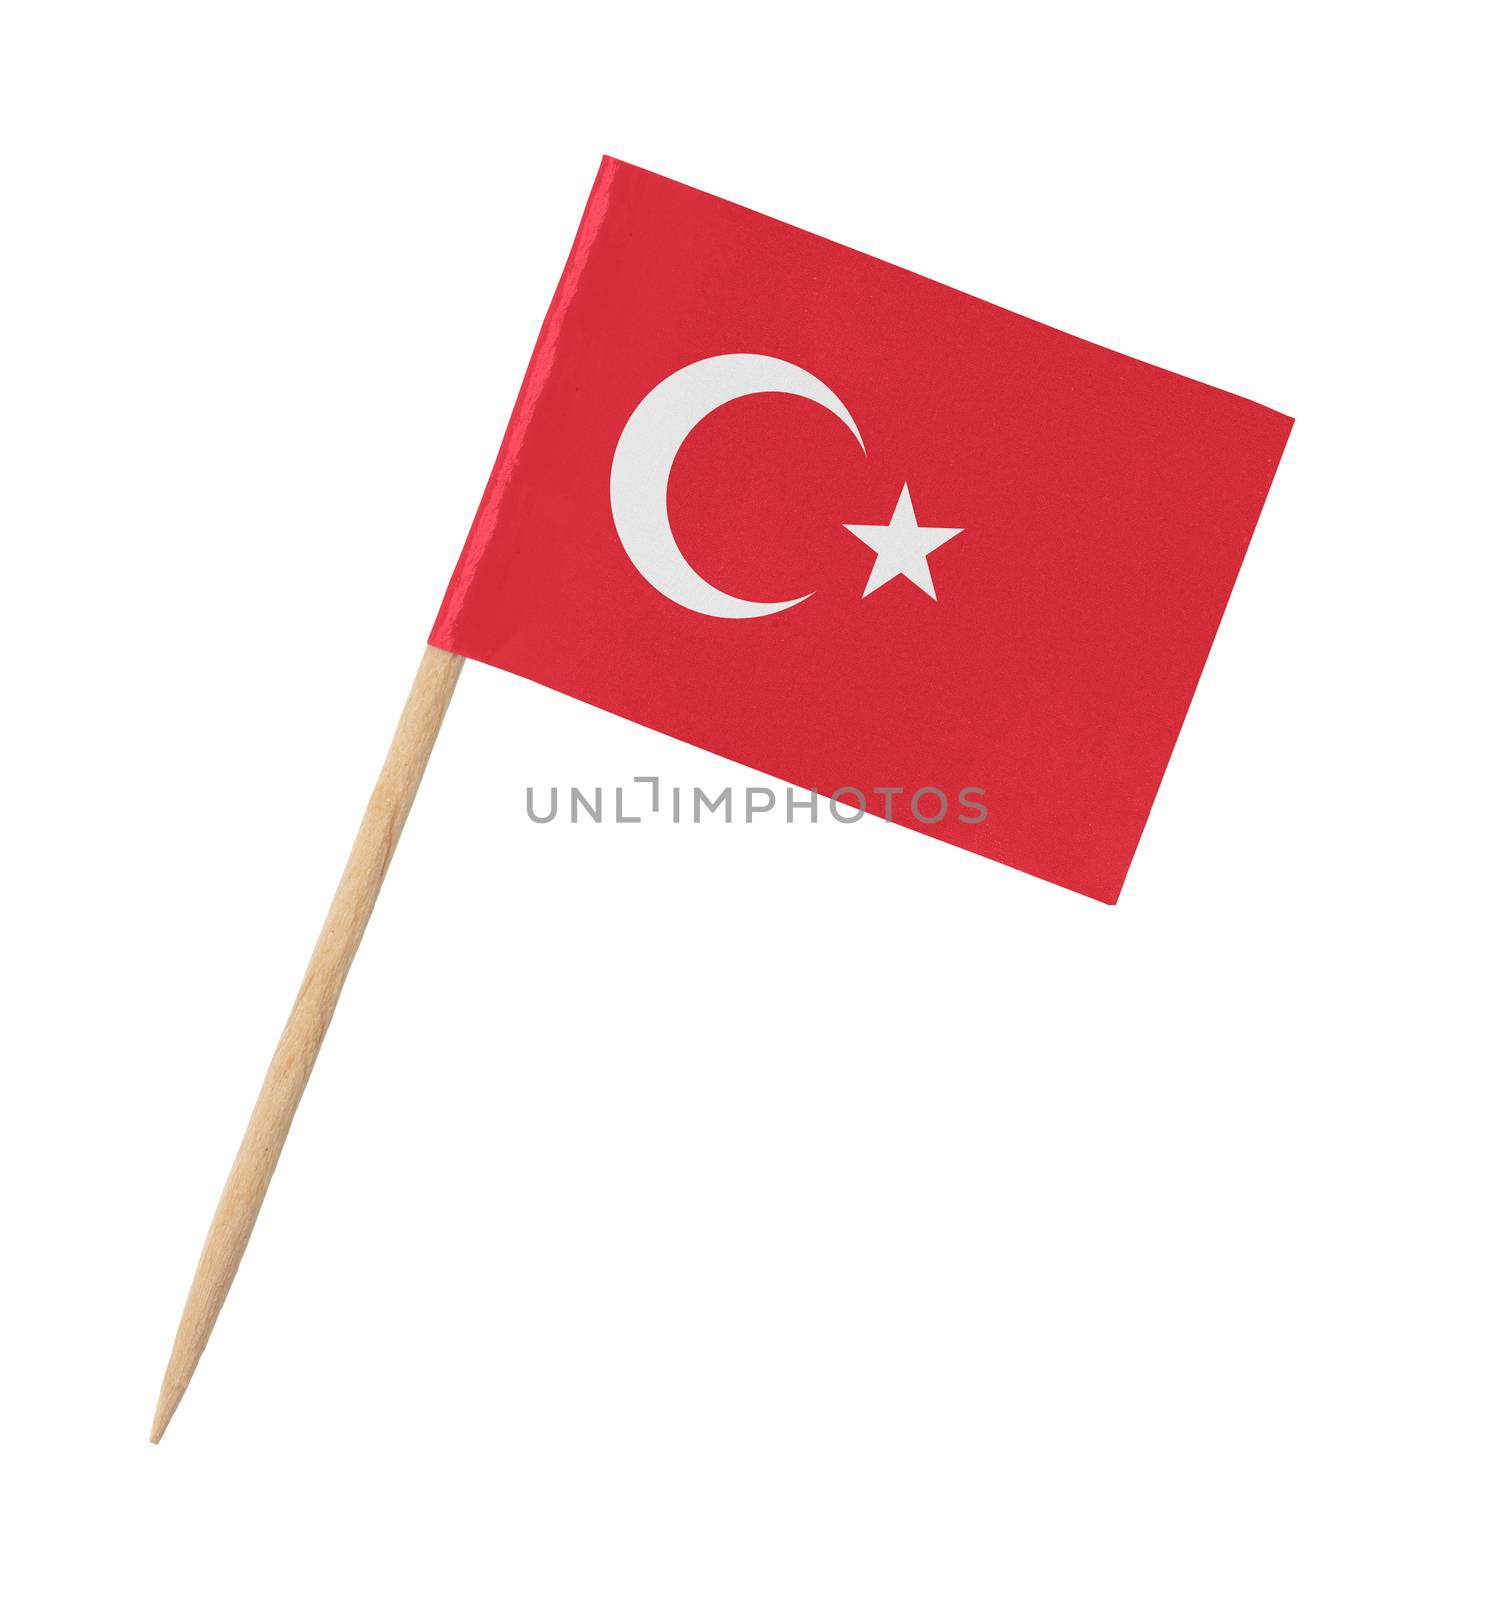 Small paper Turkish flag on wooden stick by michaklootwijk